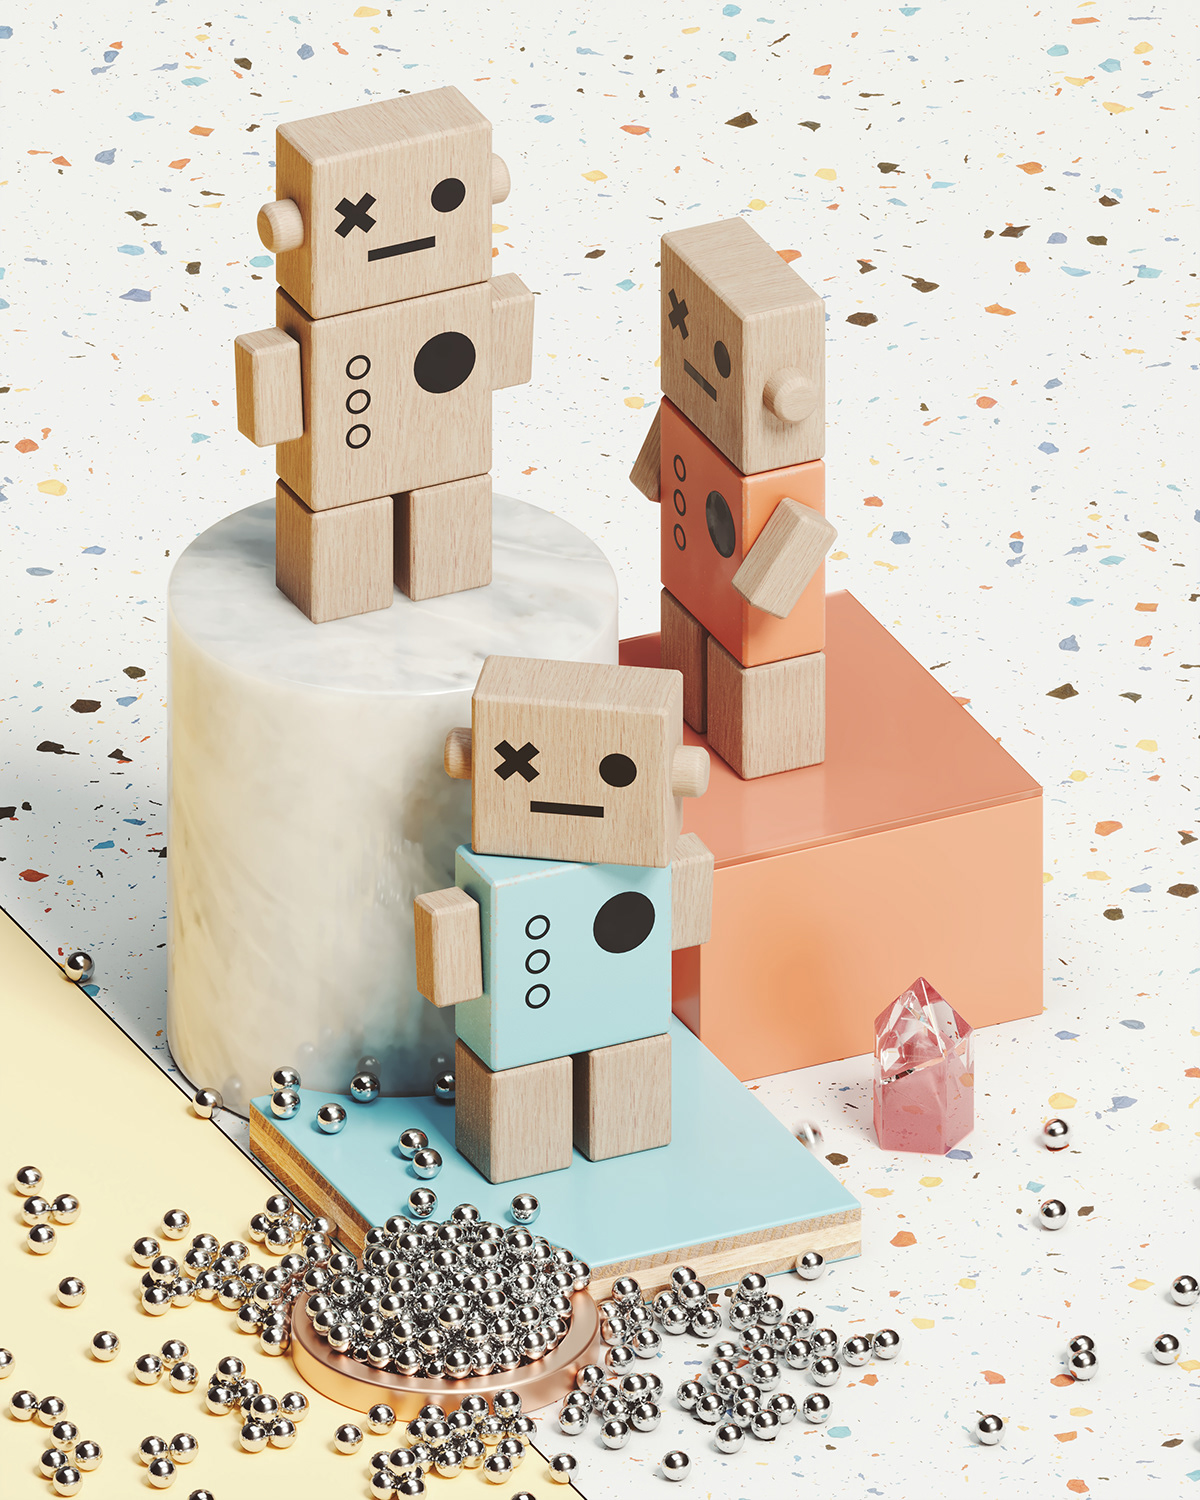 colours Fun play product render Render robot Terrazzo toy wood